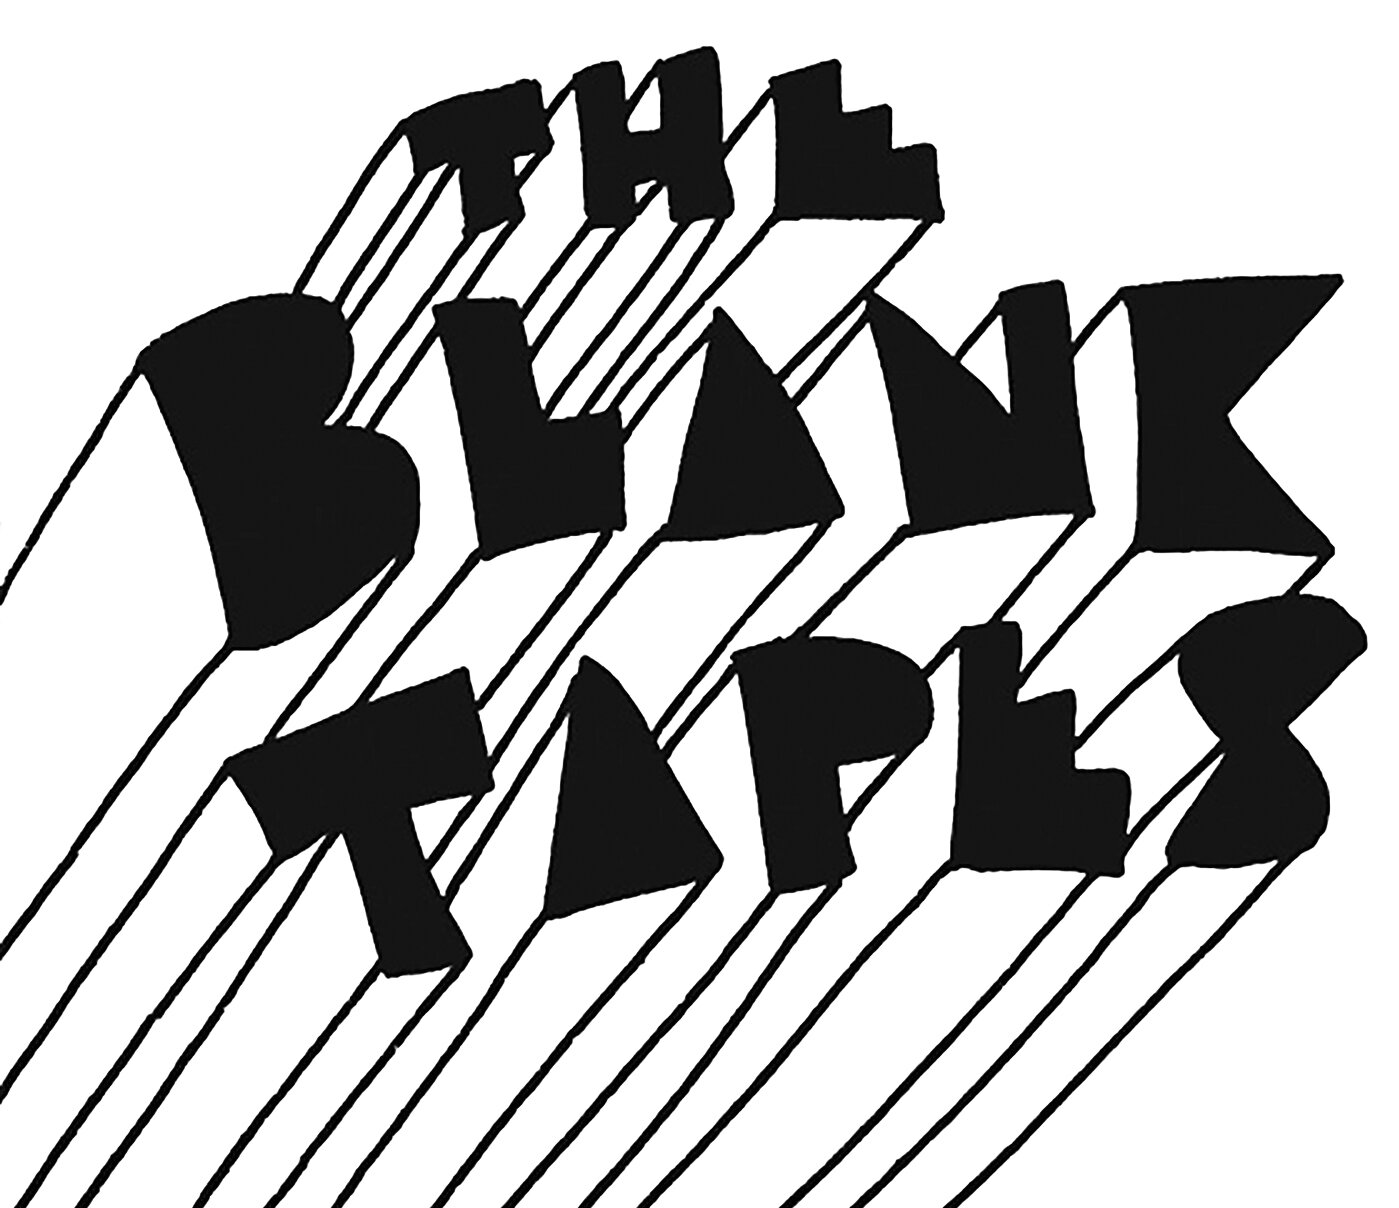 THE BLANK TAPES